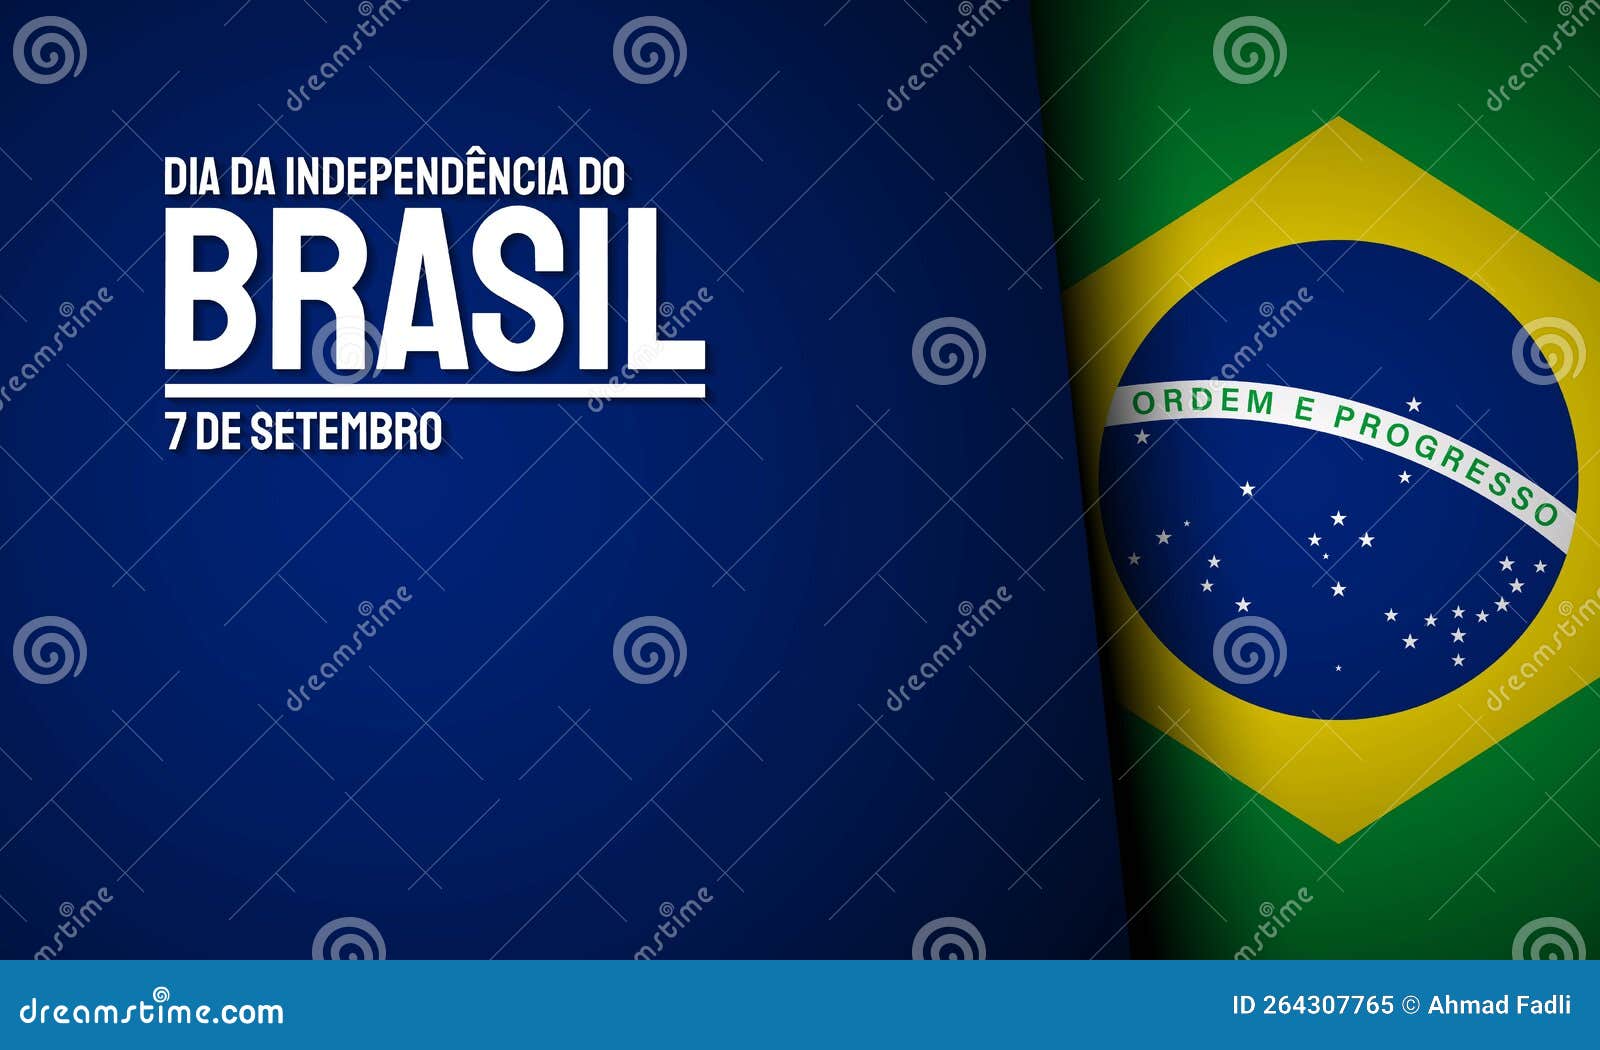 Brazil Independence Day Background Design Stock Vector